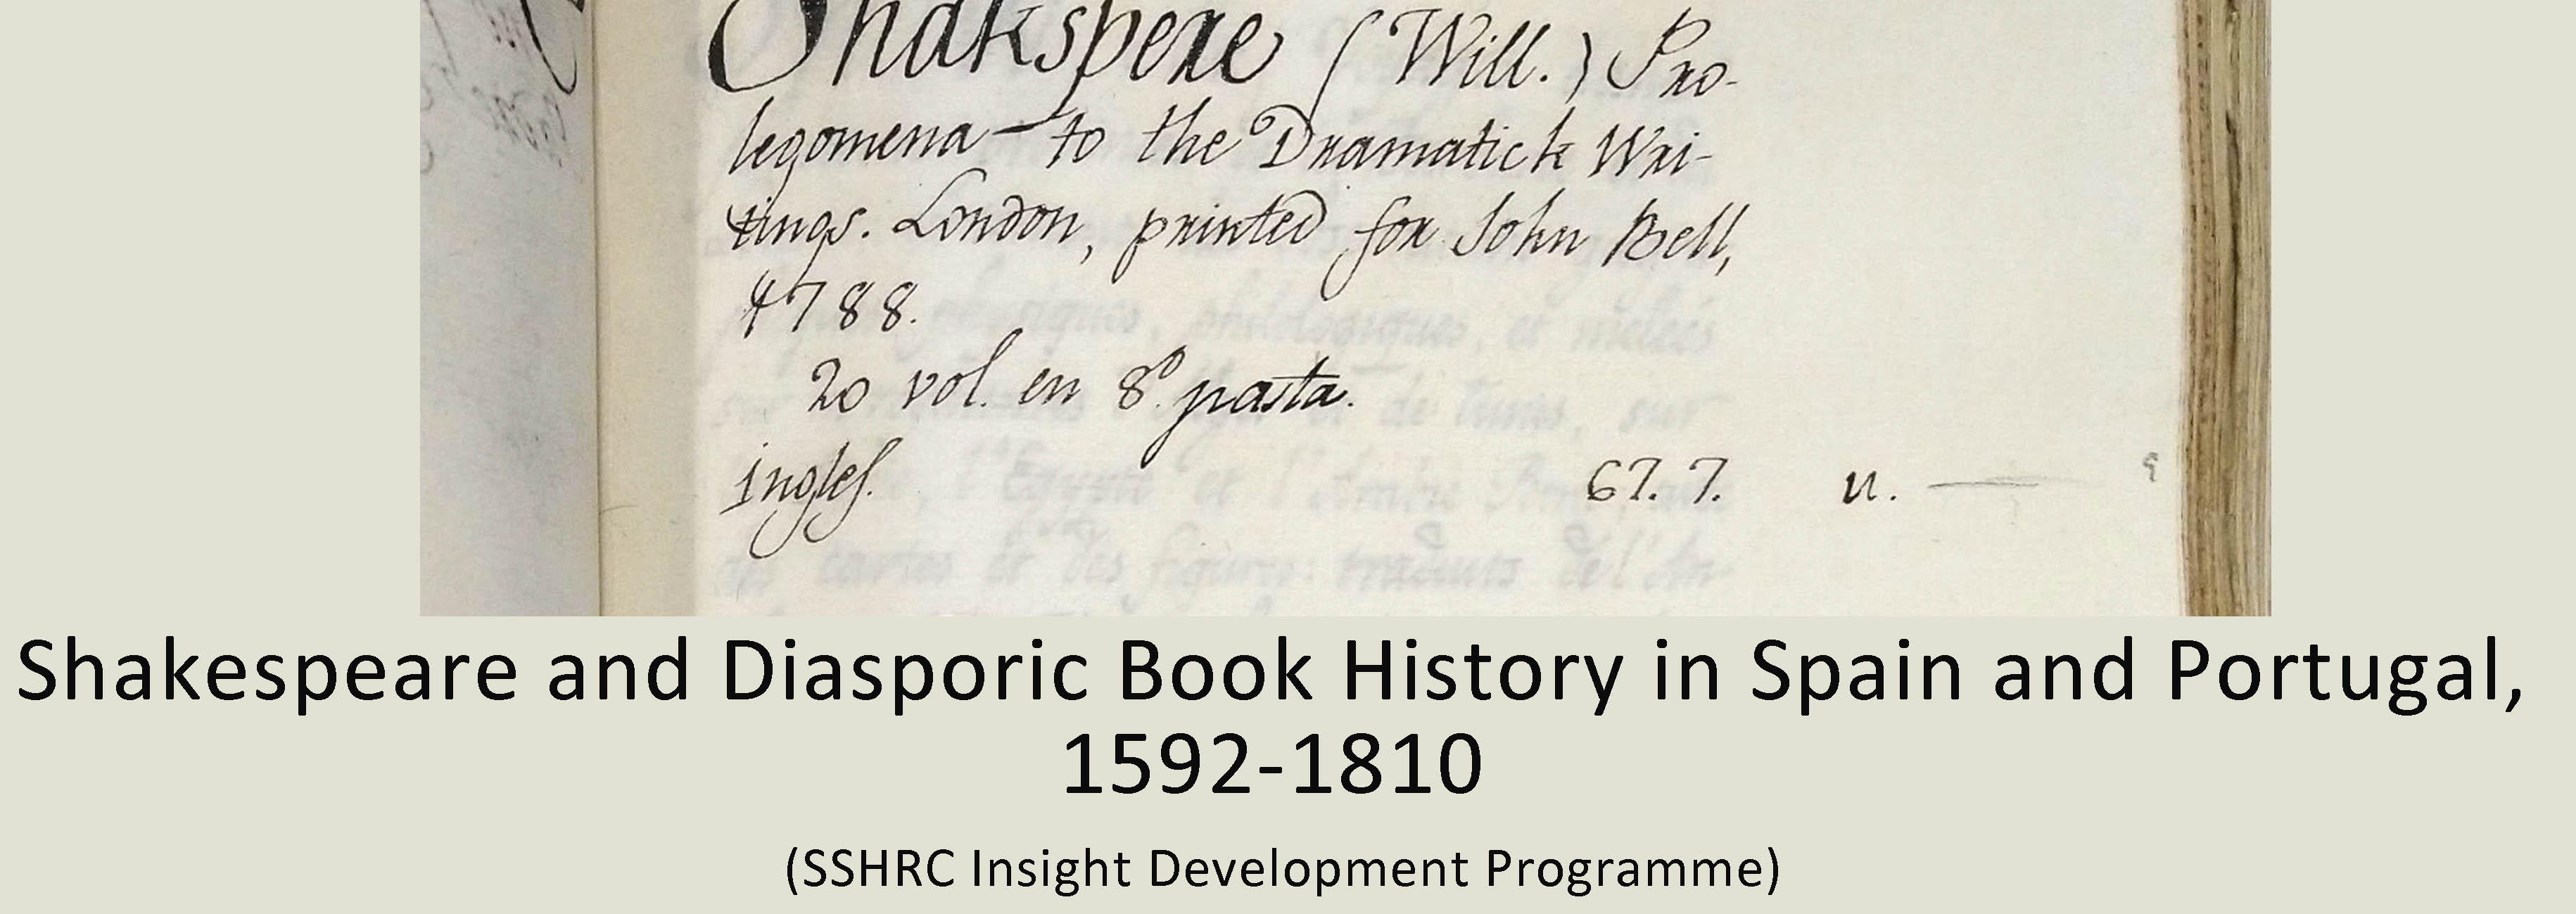 Shakespeare and Diasporic Book History in Spain and Portugal, 1592-1810